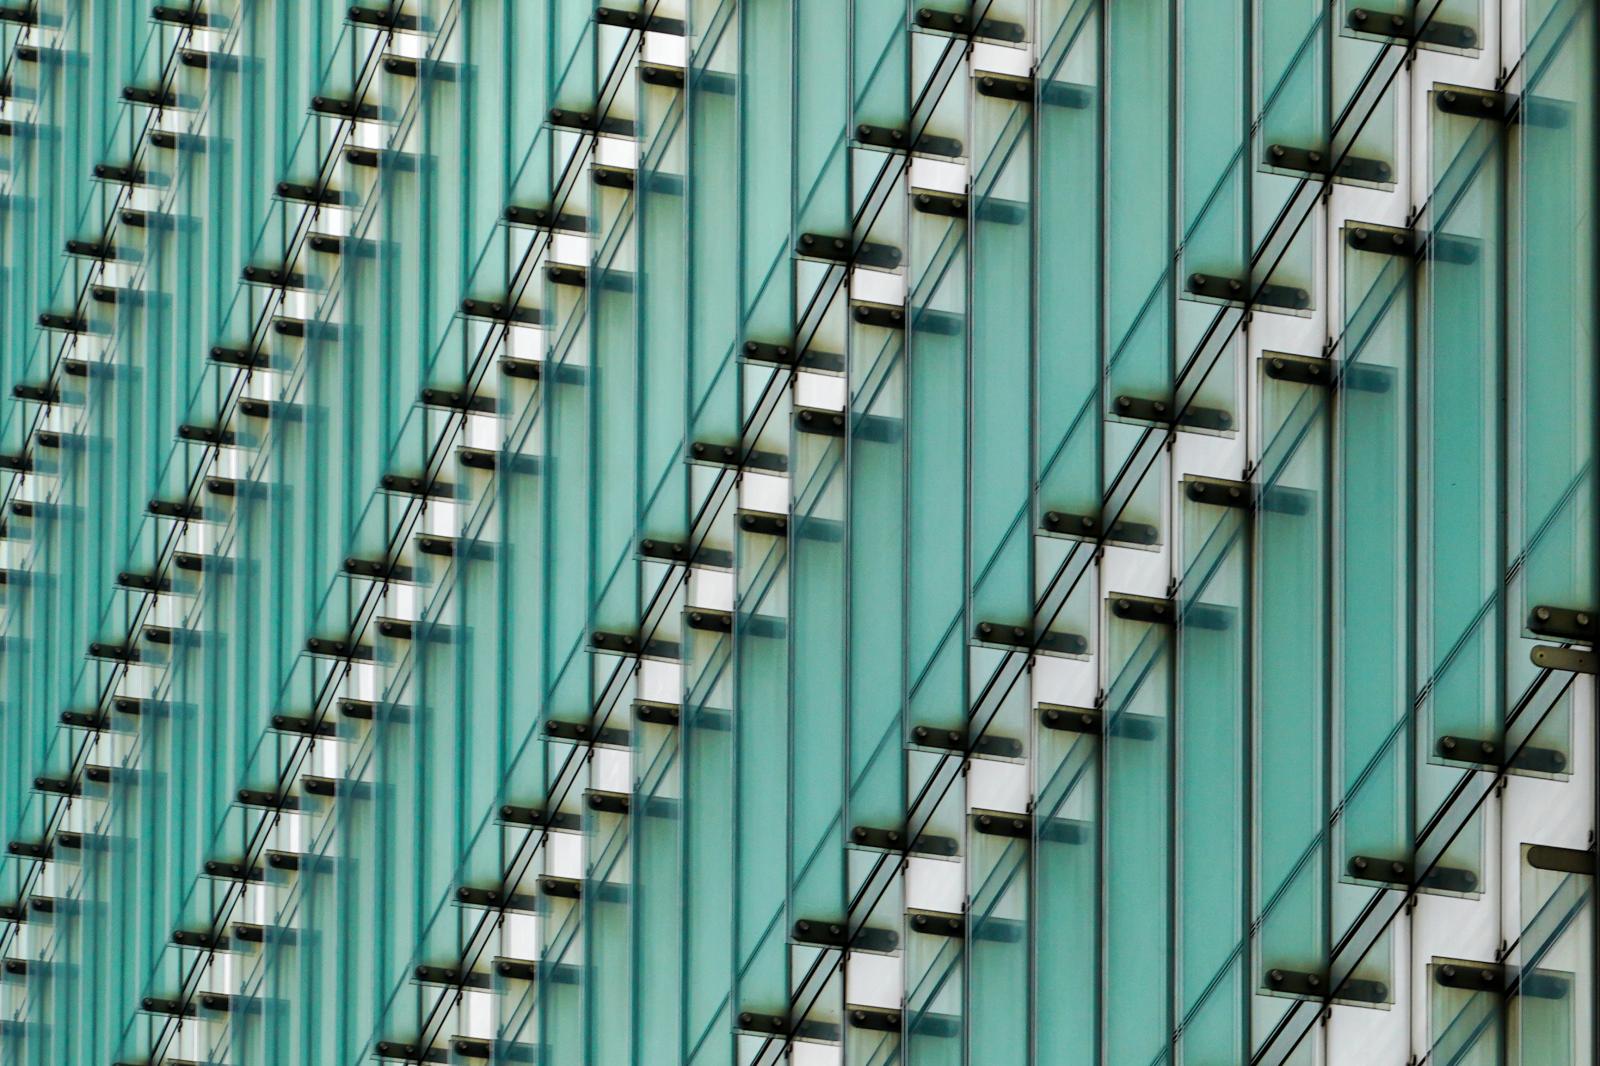 Facade of the Charlemagne Building of the European Commission | Buy this image